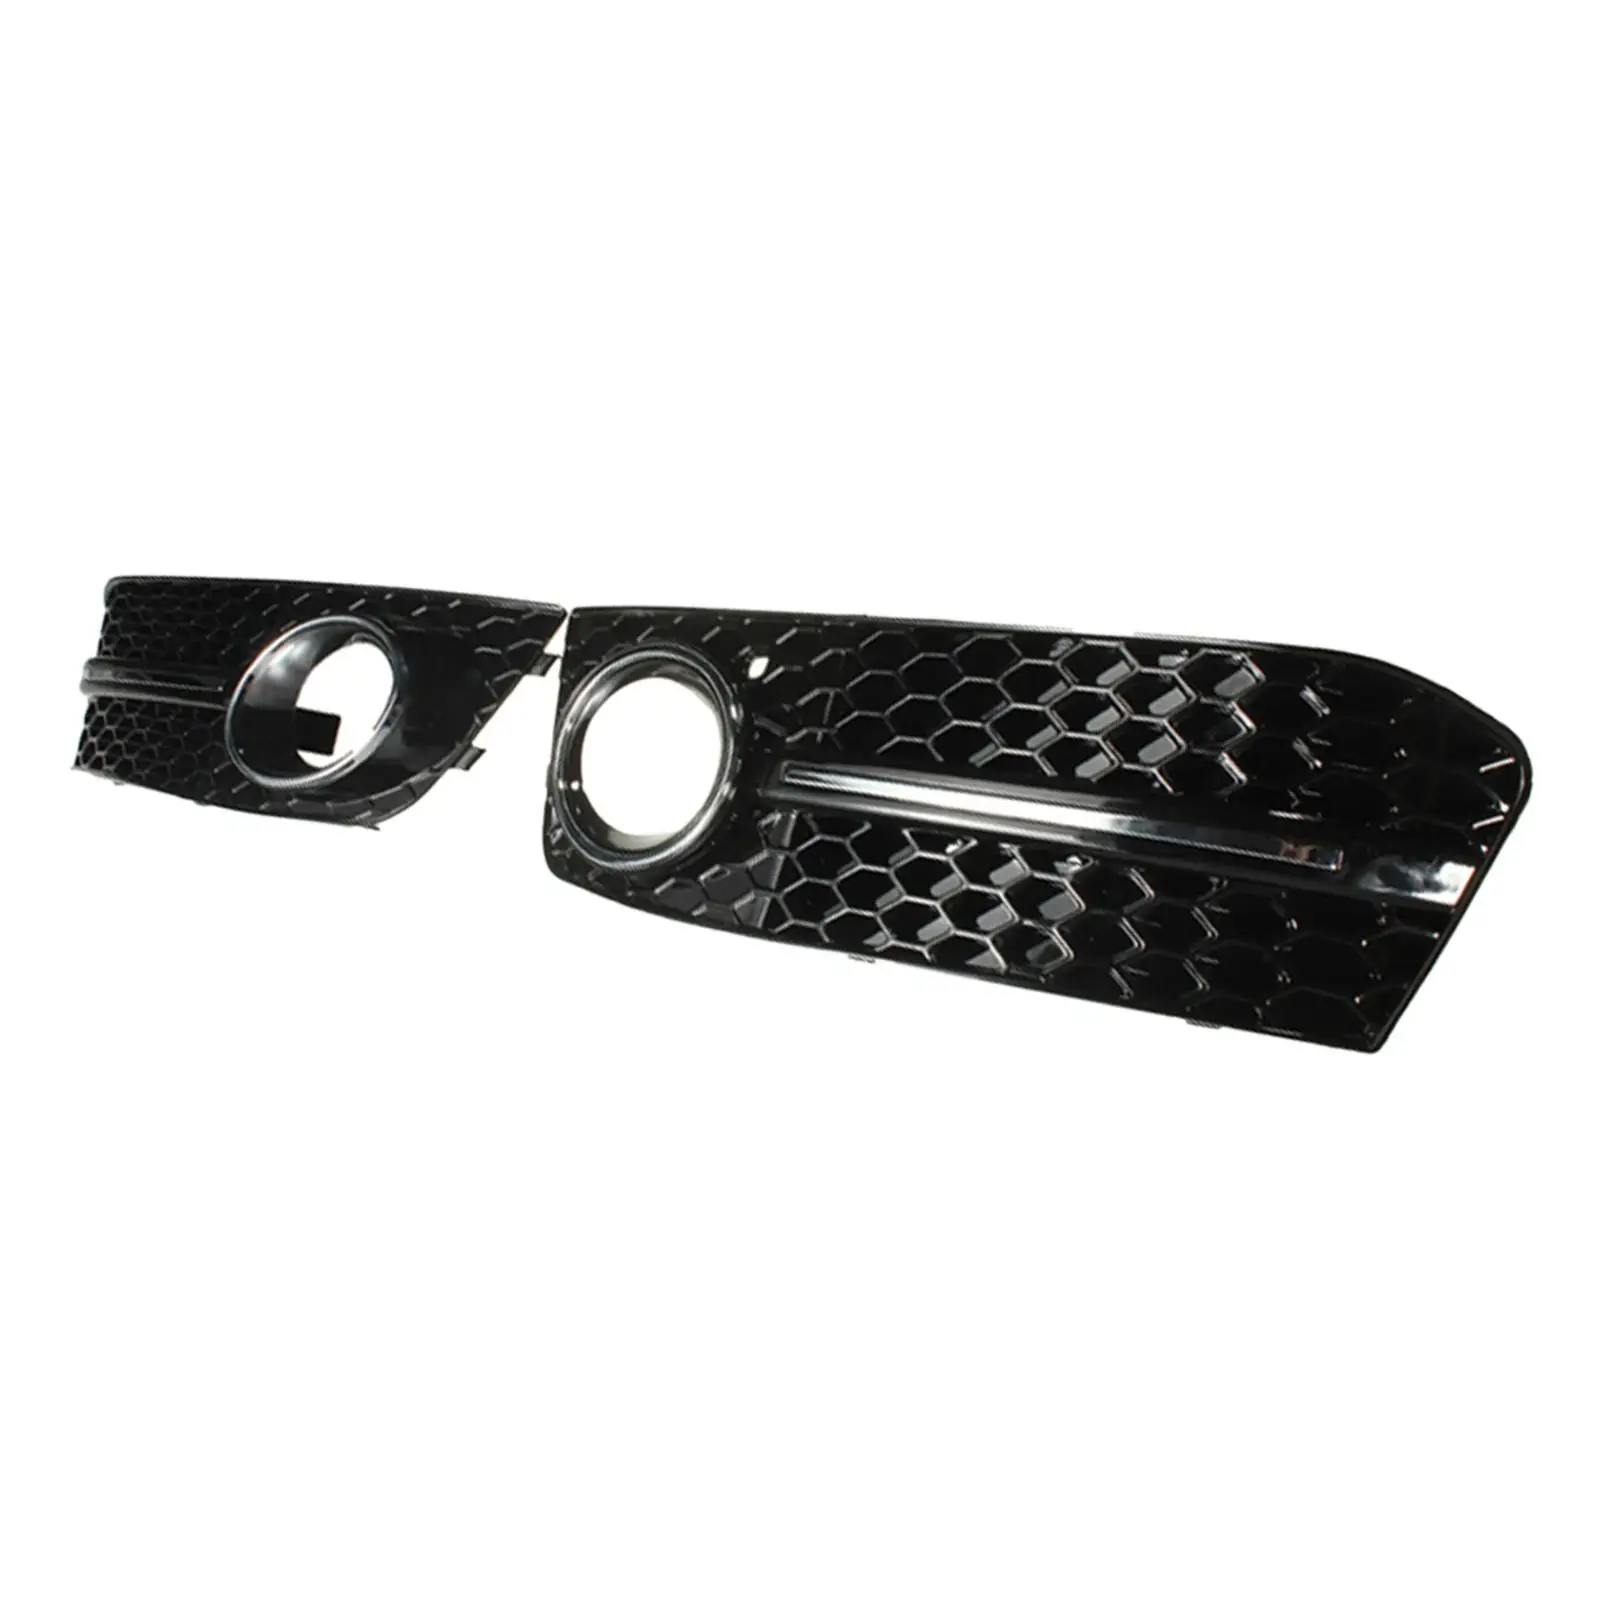 2x Light Cover Grille 8K0807681 Left Right Honeycomb Glossy Black for A4 B8 Replacement Durable